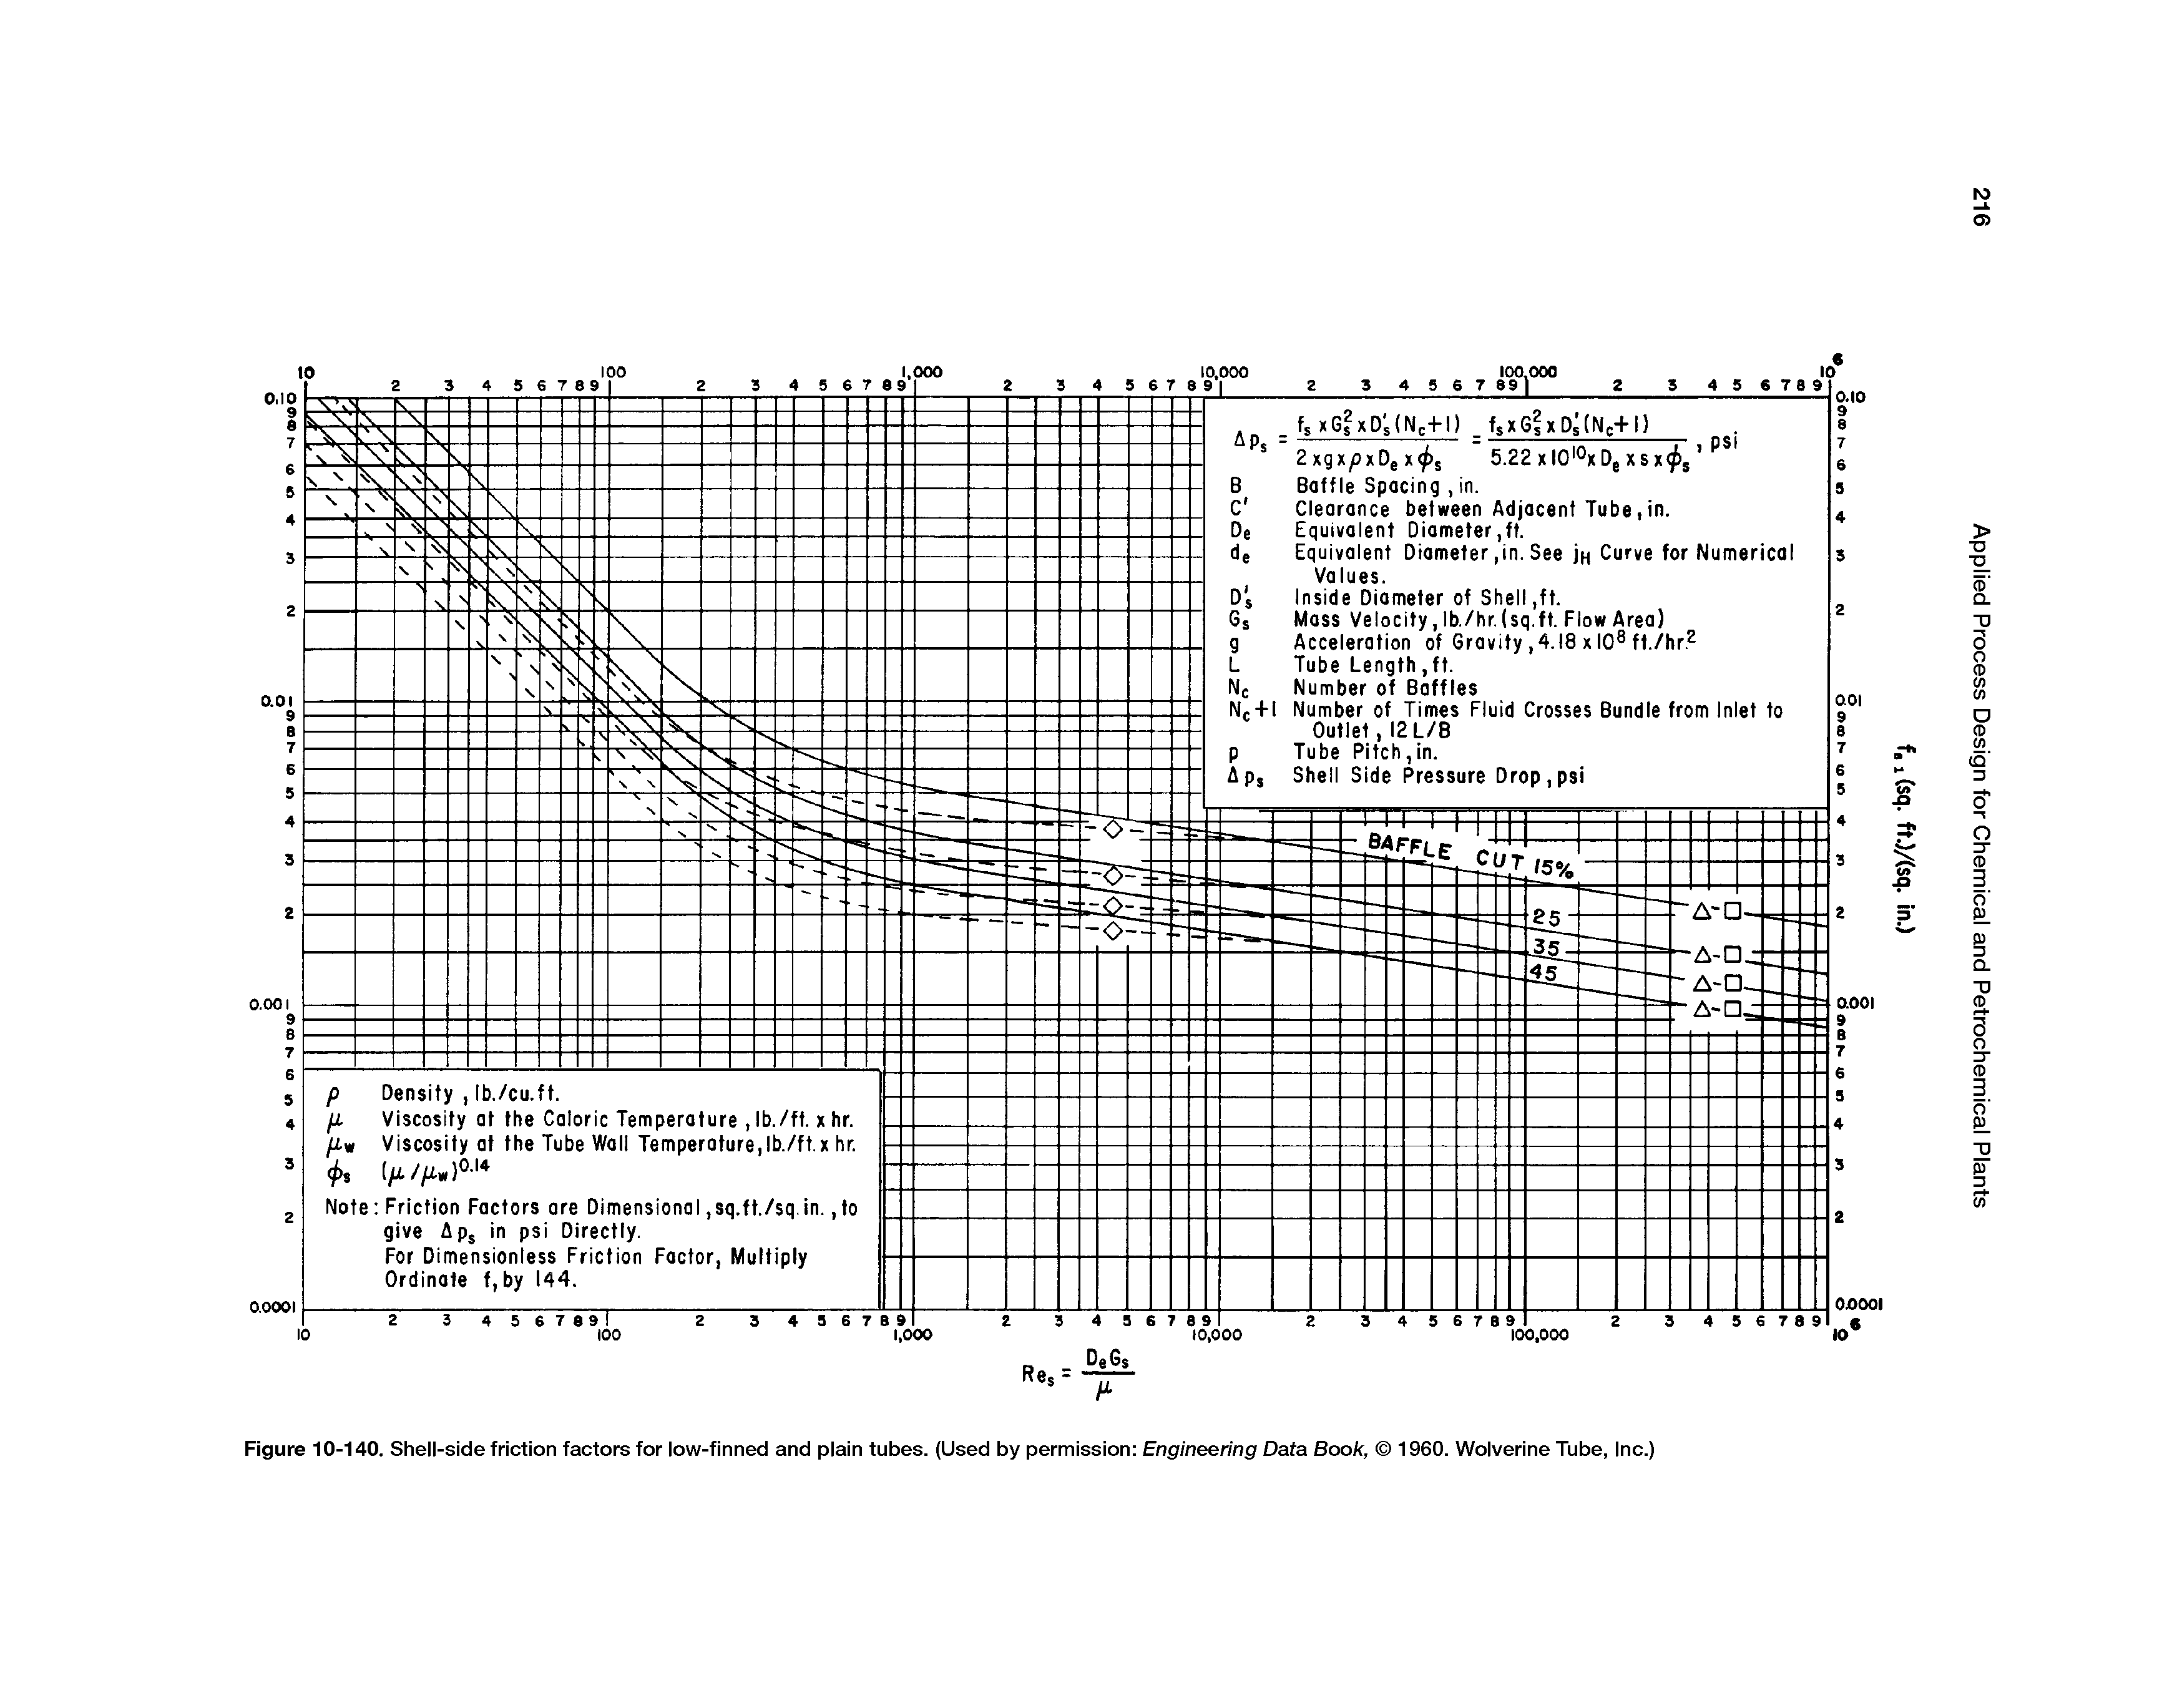 Figure 10-140. Shell-side friction factors for low-finned and plain tubes. (Used by permission Engineering Data Book, 1960. Wolverine Tube, Inc.)...